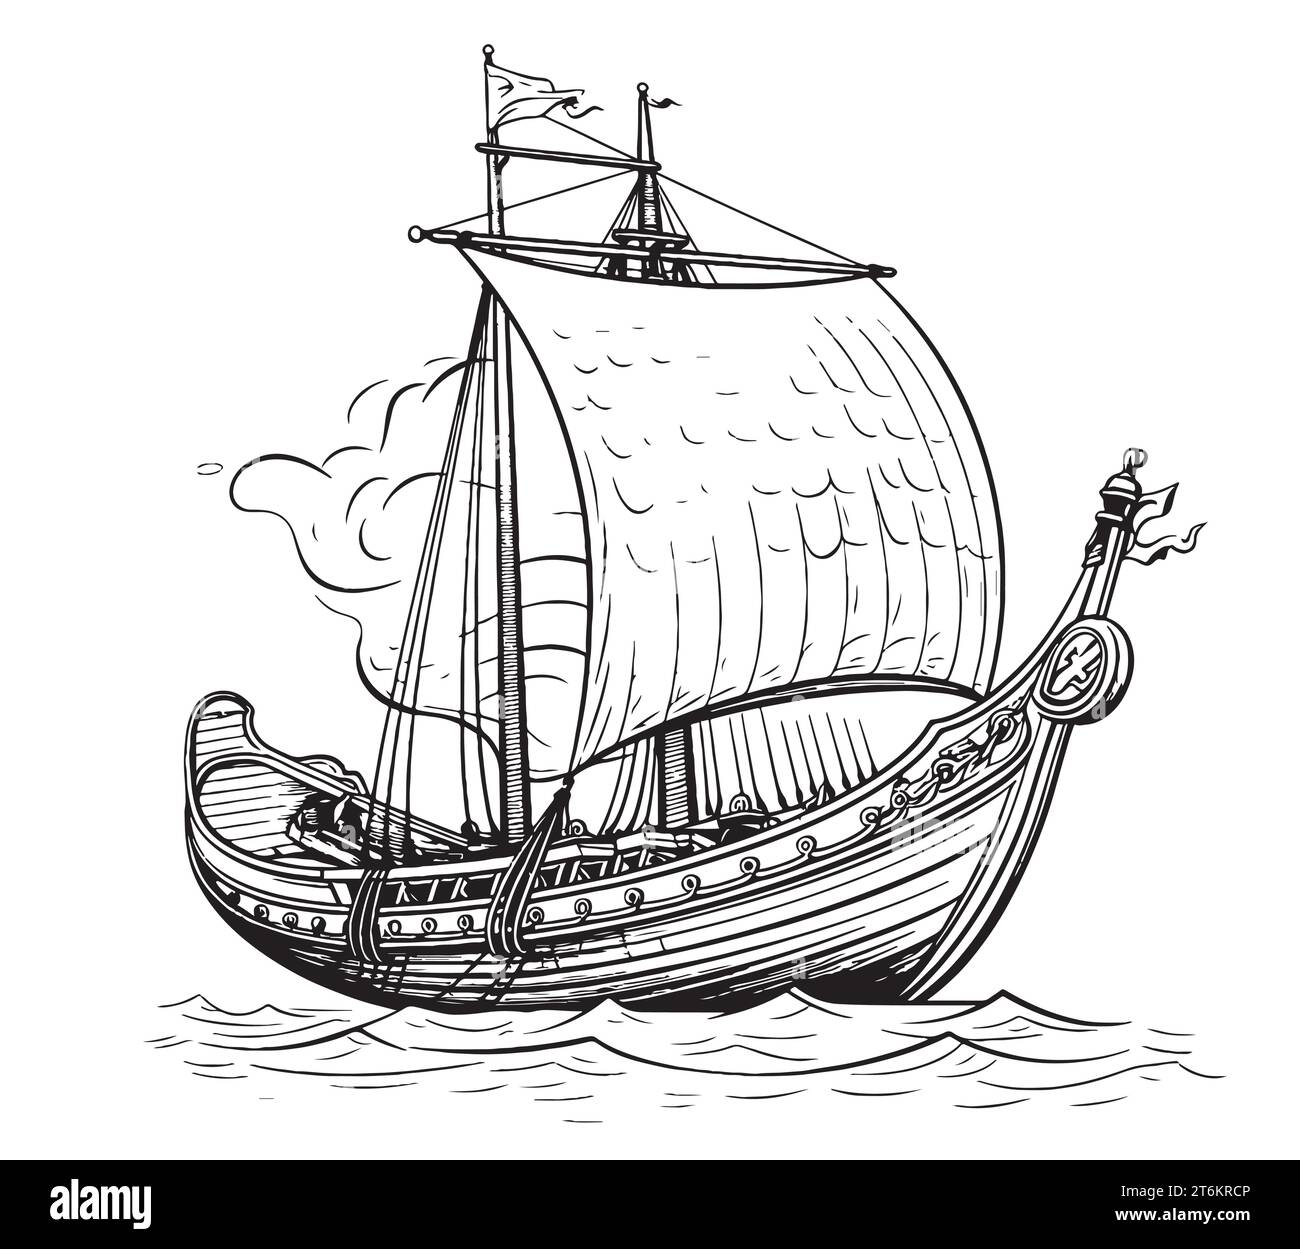 Drakkar floating on the sea waves. Hand drawn design element sailing ship. Vintage vector engraving illustration for poster, label, postmark with sailboat. Isolated on white background Stock Vector